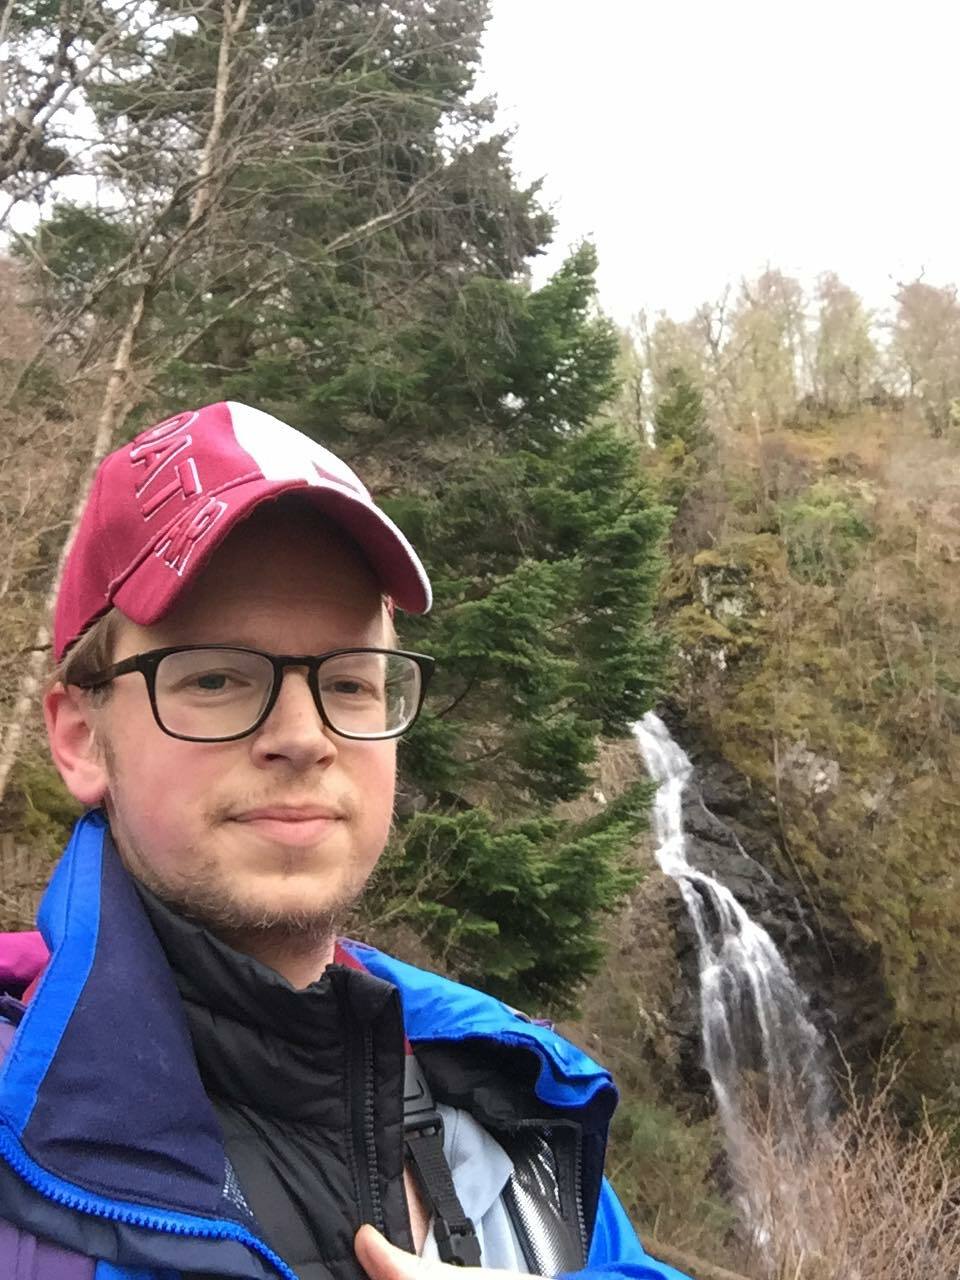 Ben Lindstrom-Ives at the Falls of Divach near the Great Glen Way, not far from where the Sag Harbor native is sheltering in place during the COVID-19 pandemic.